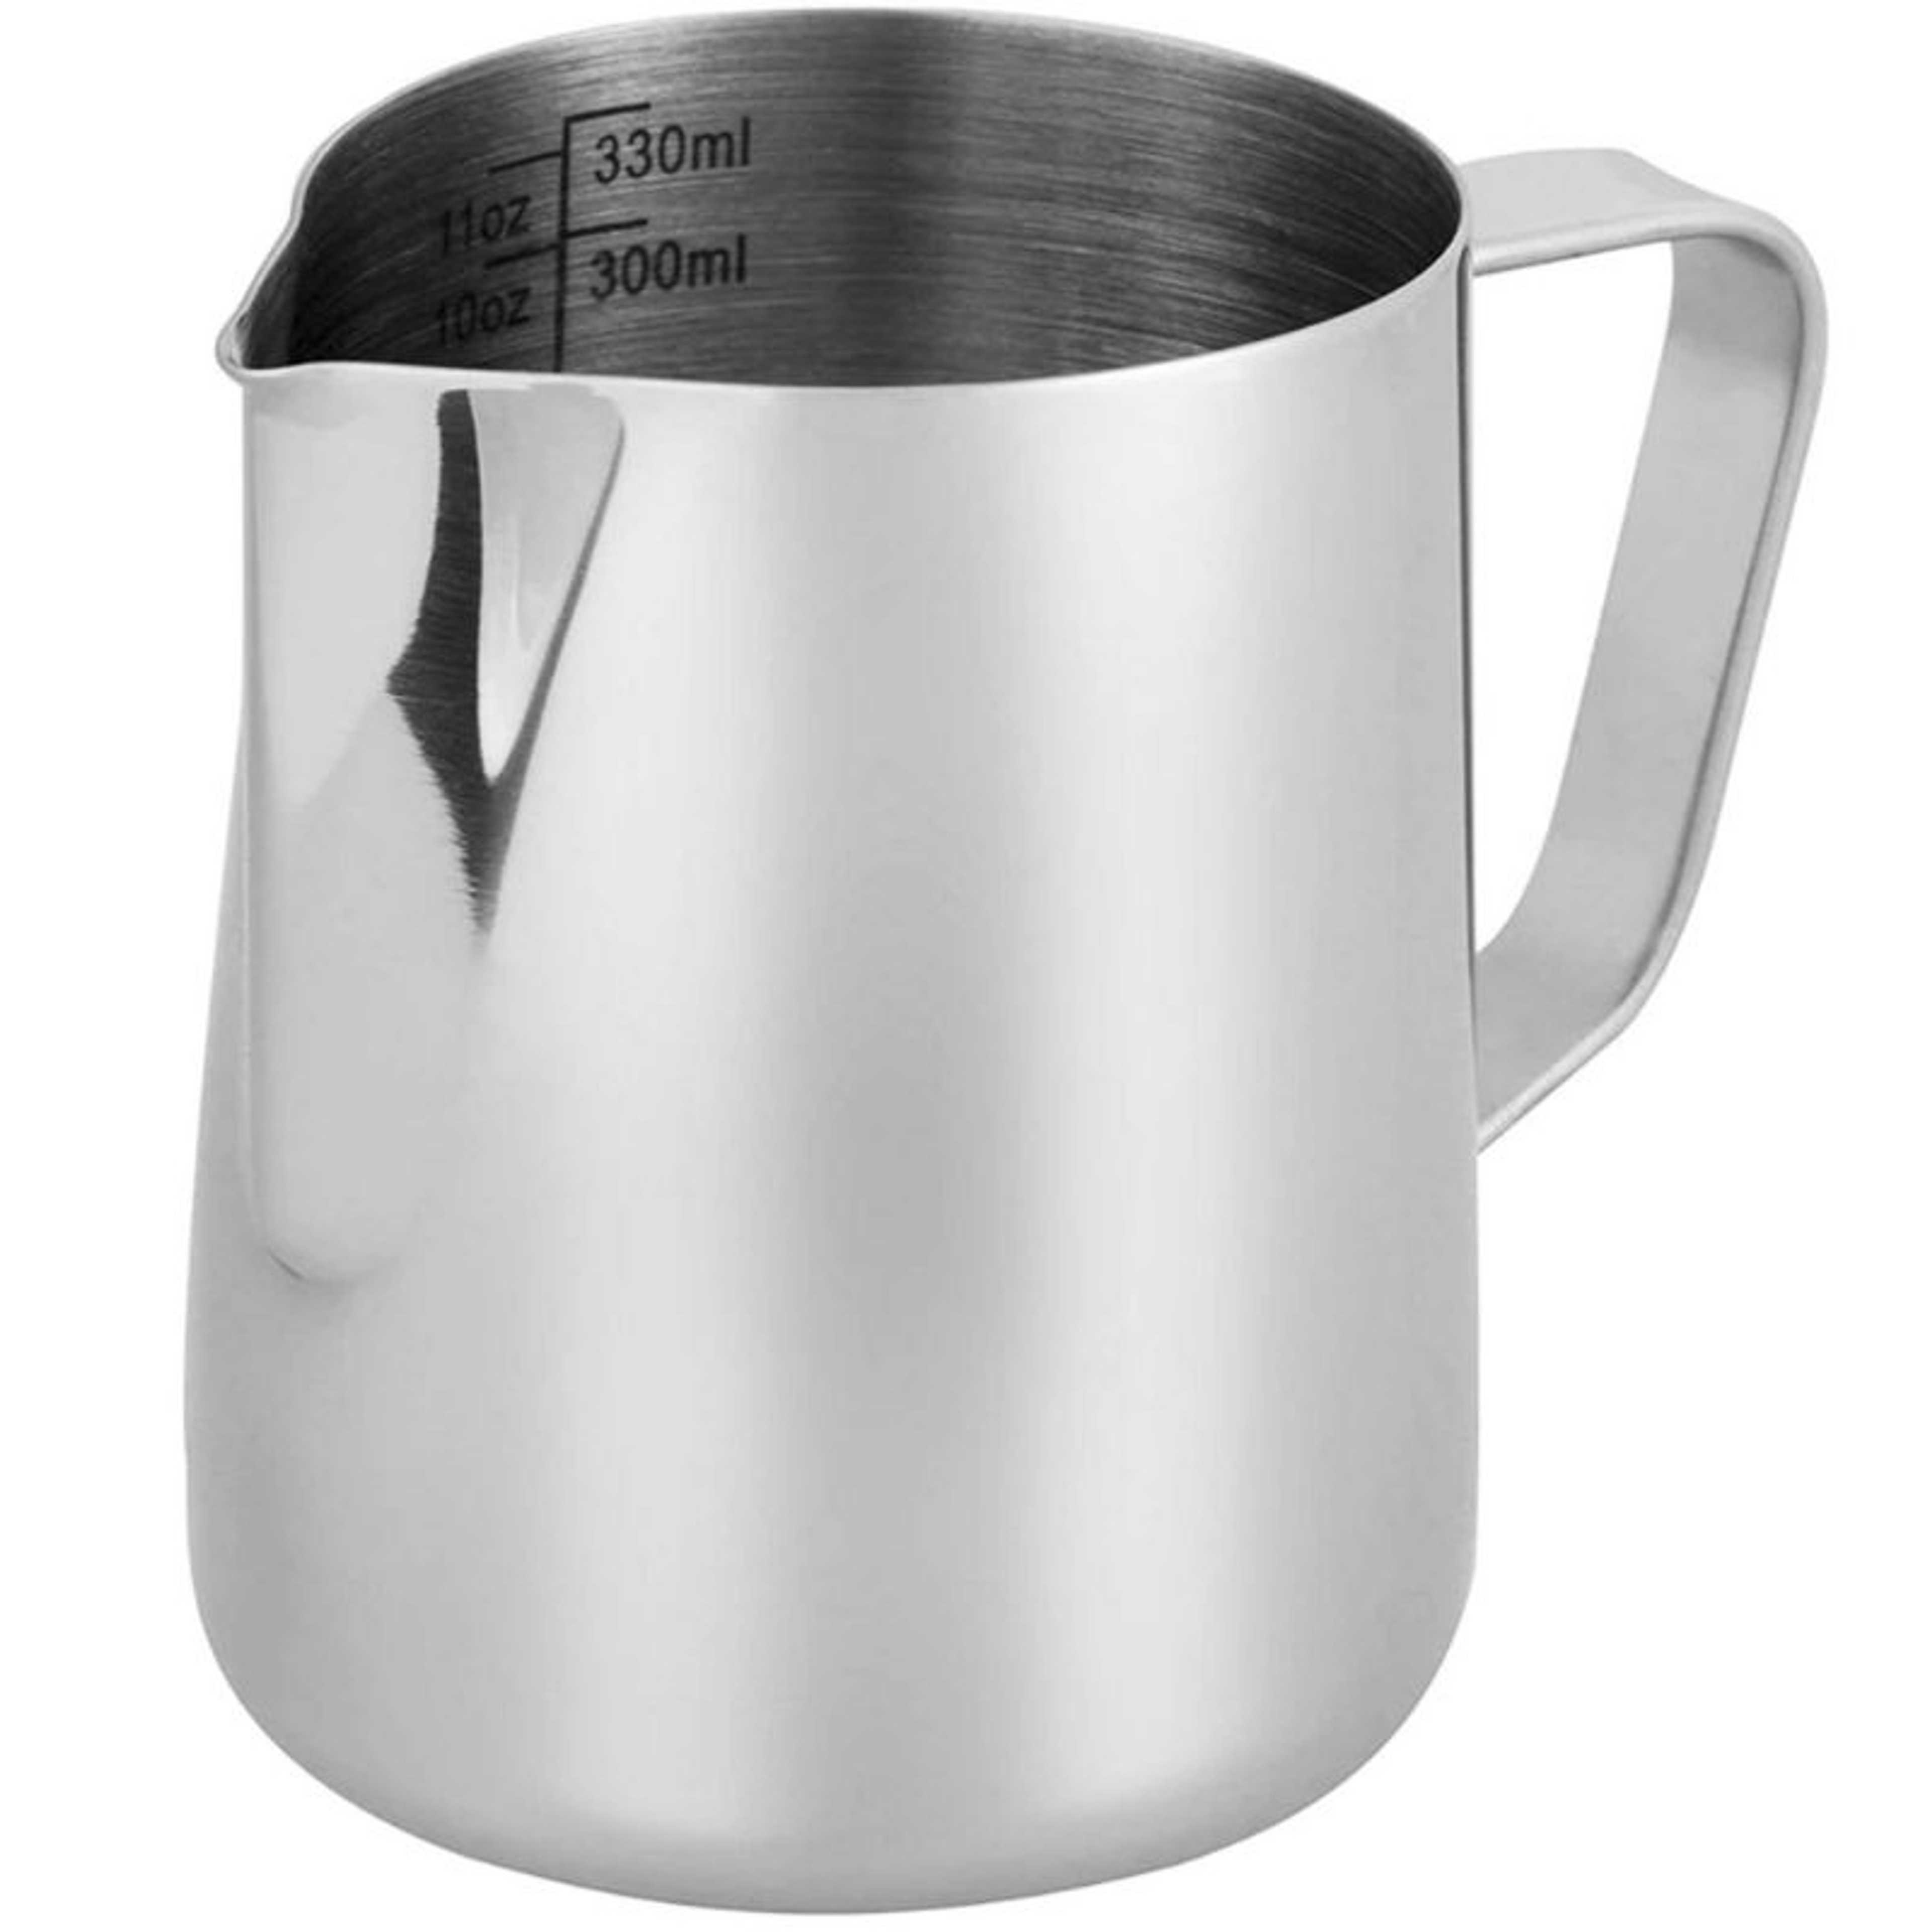 Milk Jug 350ml/12 fl.oz, 304 Stainless Steel Milk Pitcher, Milk Frothing Jug for Making Coffee Cappuccino